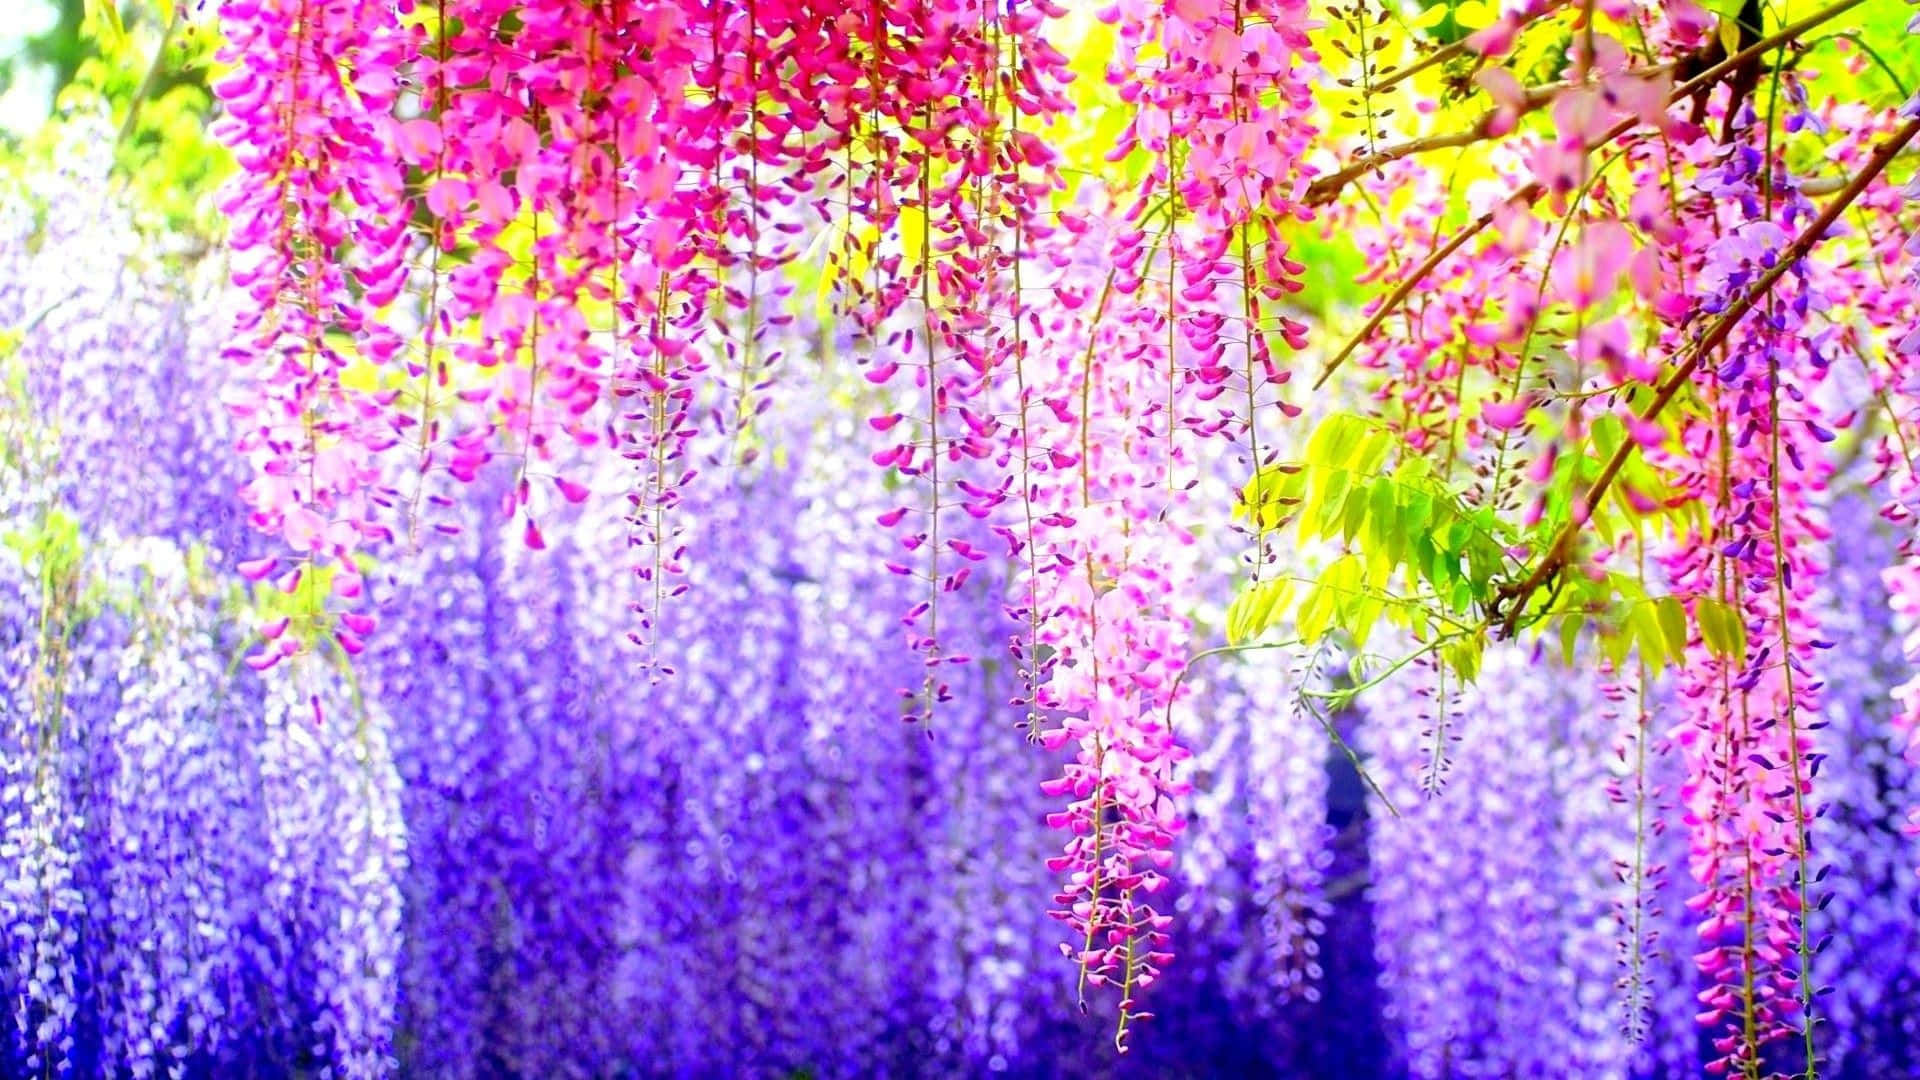 Stunning Colorful Flowers Blooming in a Garden Wallpaper